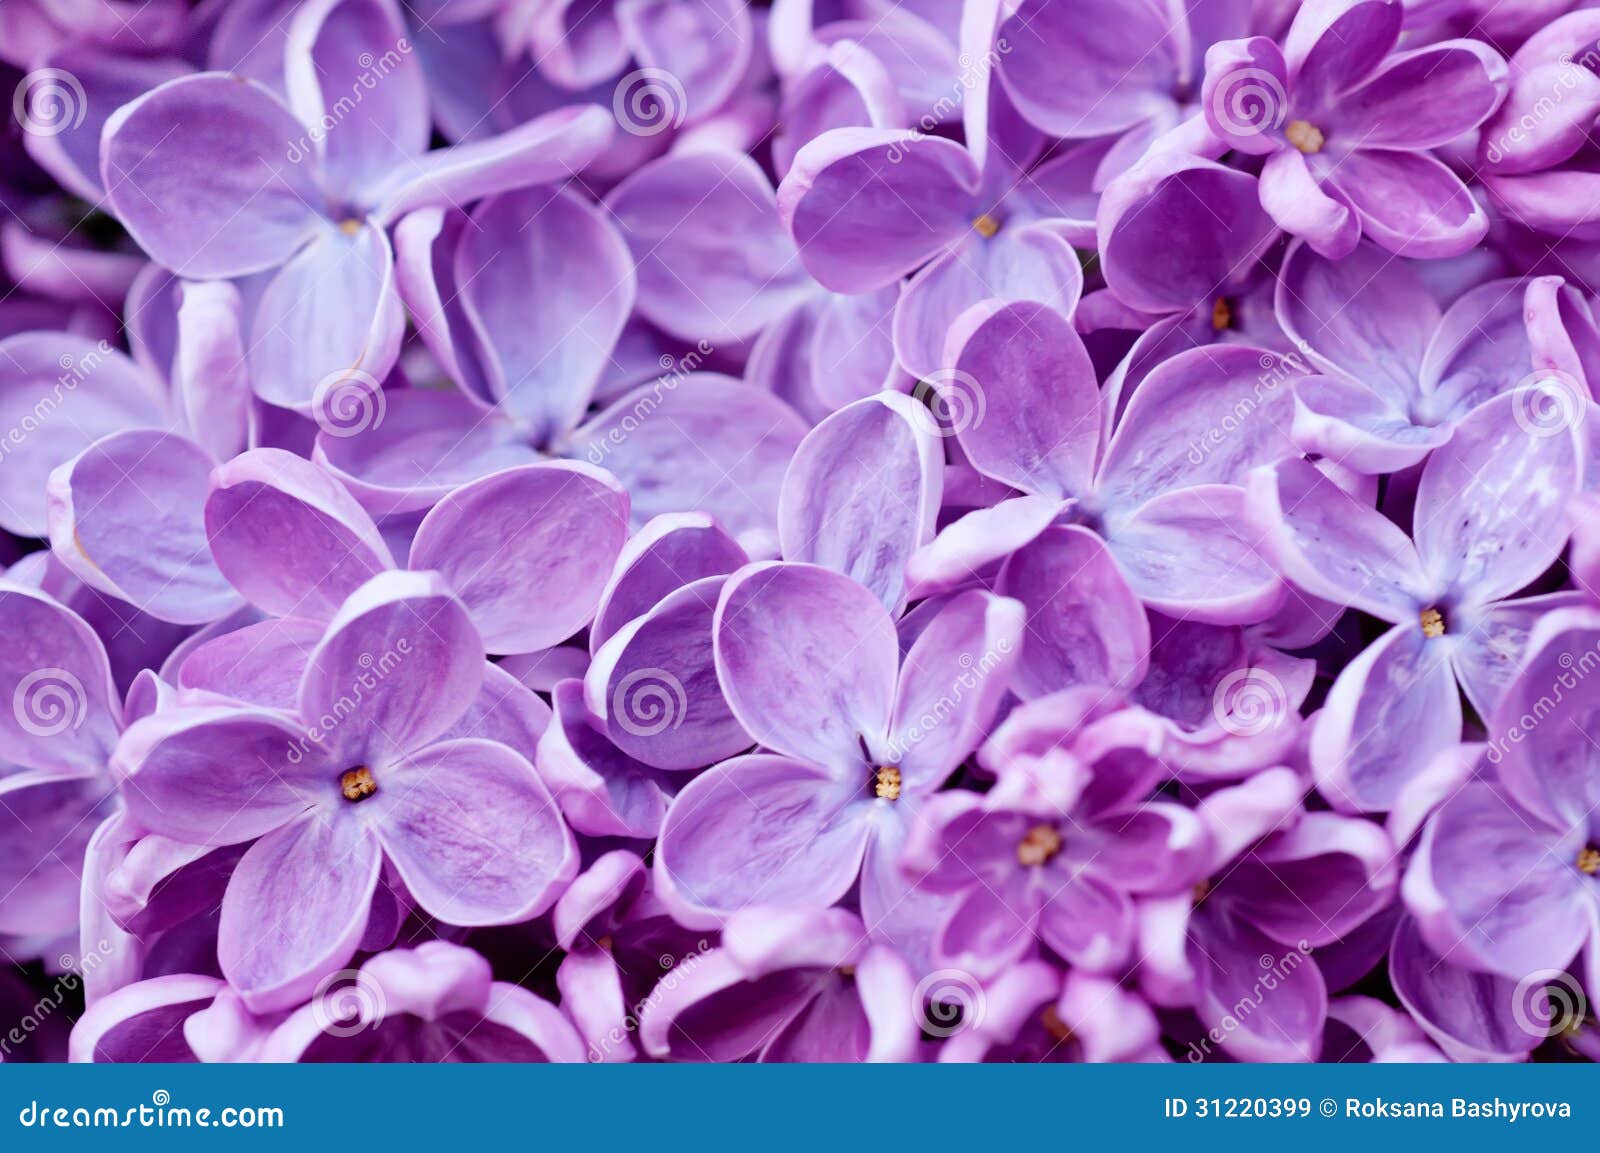 Lilac flowers background stock image. Image of floral - 31220399